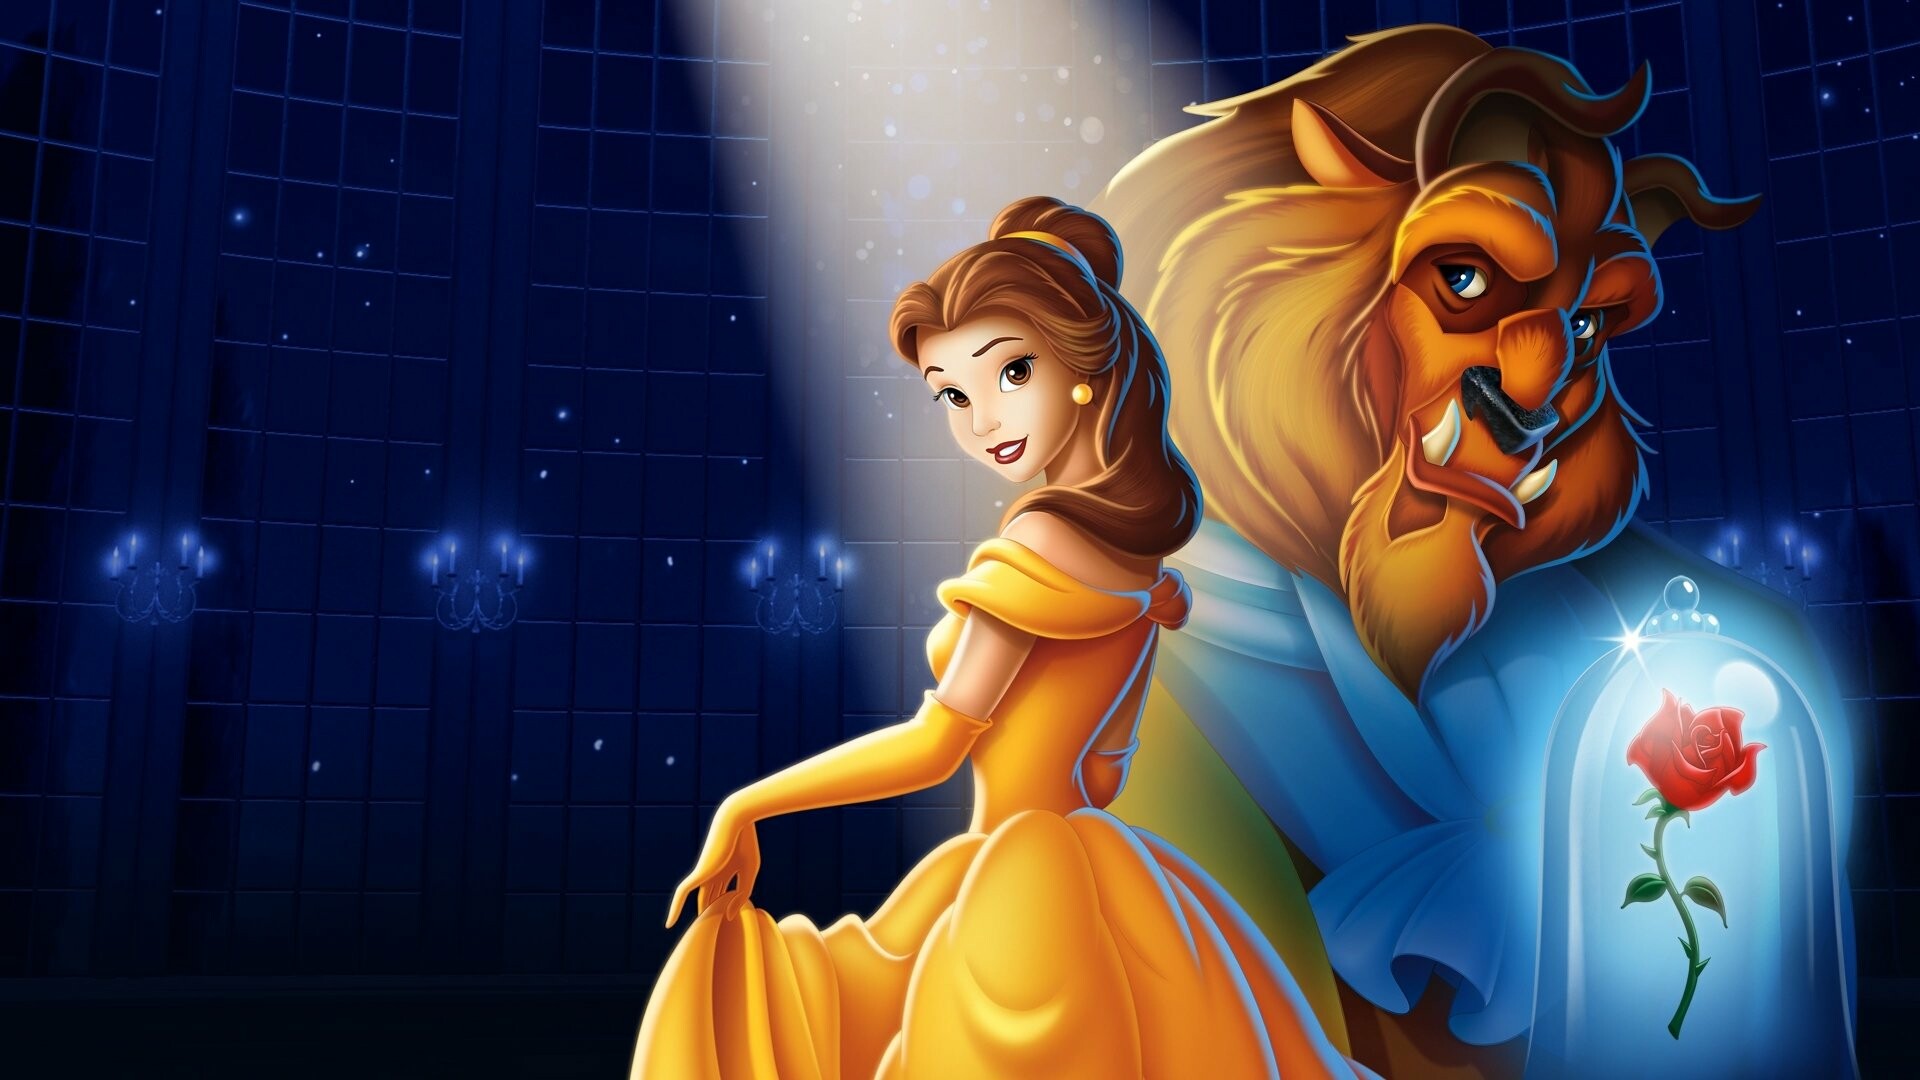 Beauty and the Beast: A 1991 American animated musical romantic fantasy film produced by Walt Disney Feature Animation. 1920x1080 Full HD Wallpaper.